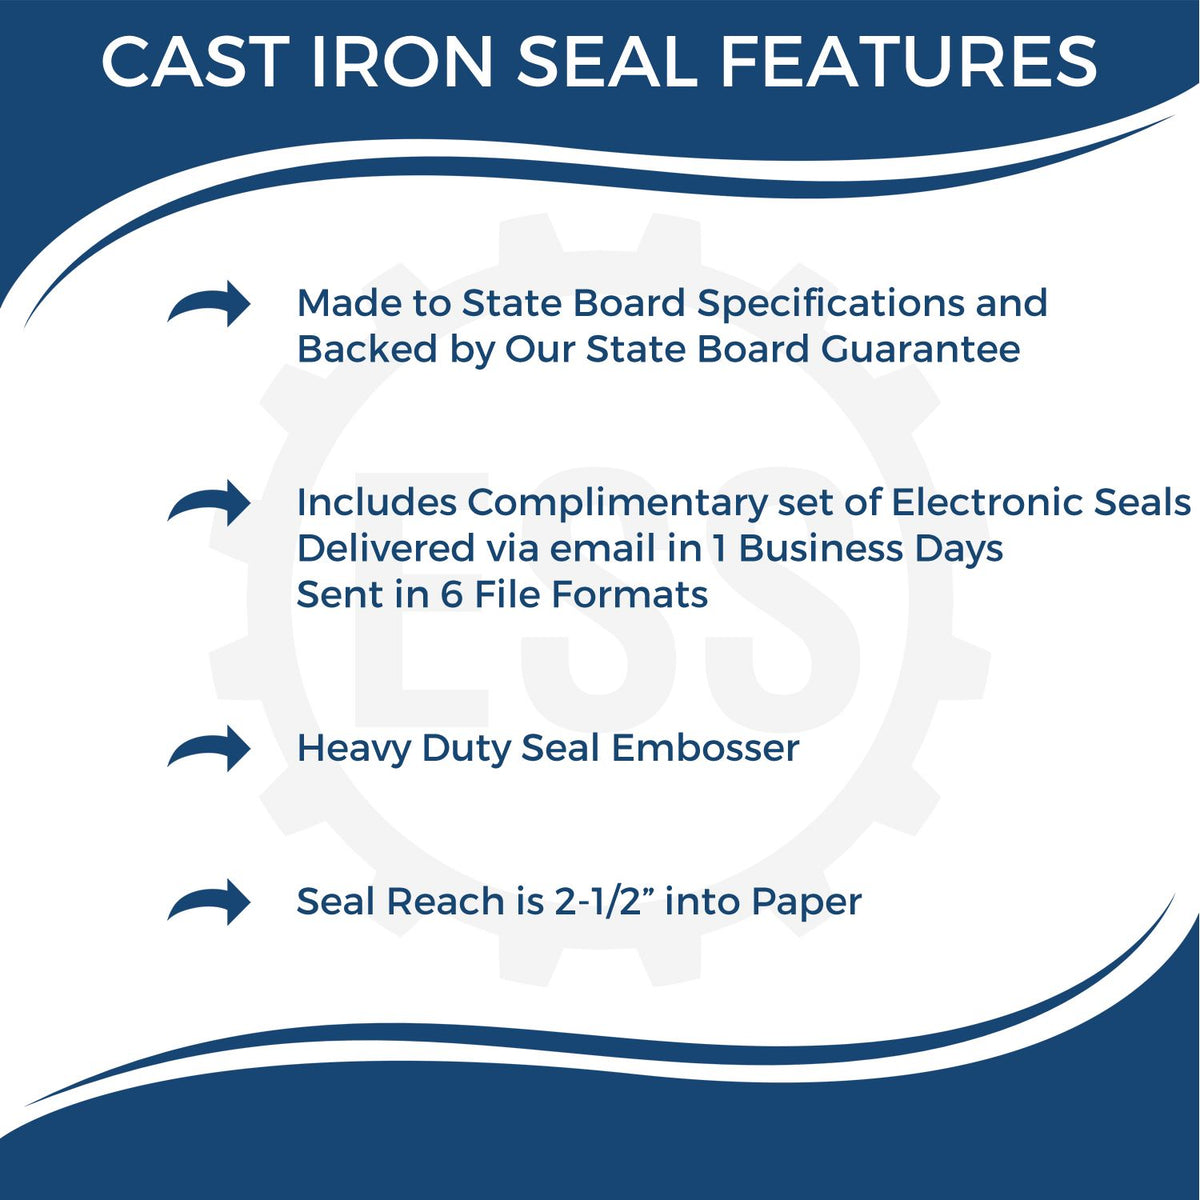 A picture of an infographic highlighting the selling points for the Heavy Duty Cast Iron Maryland Geologist Seal Embosser